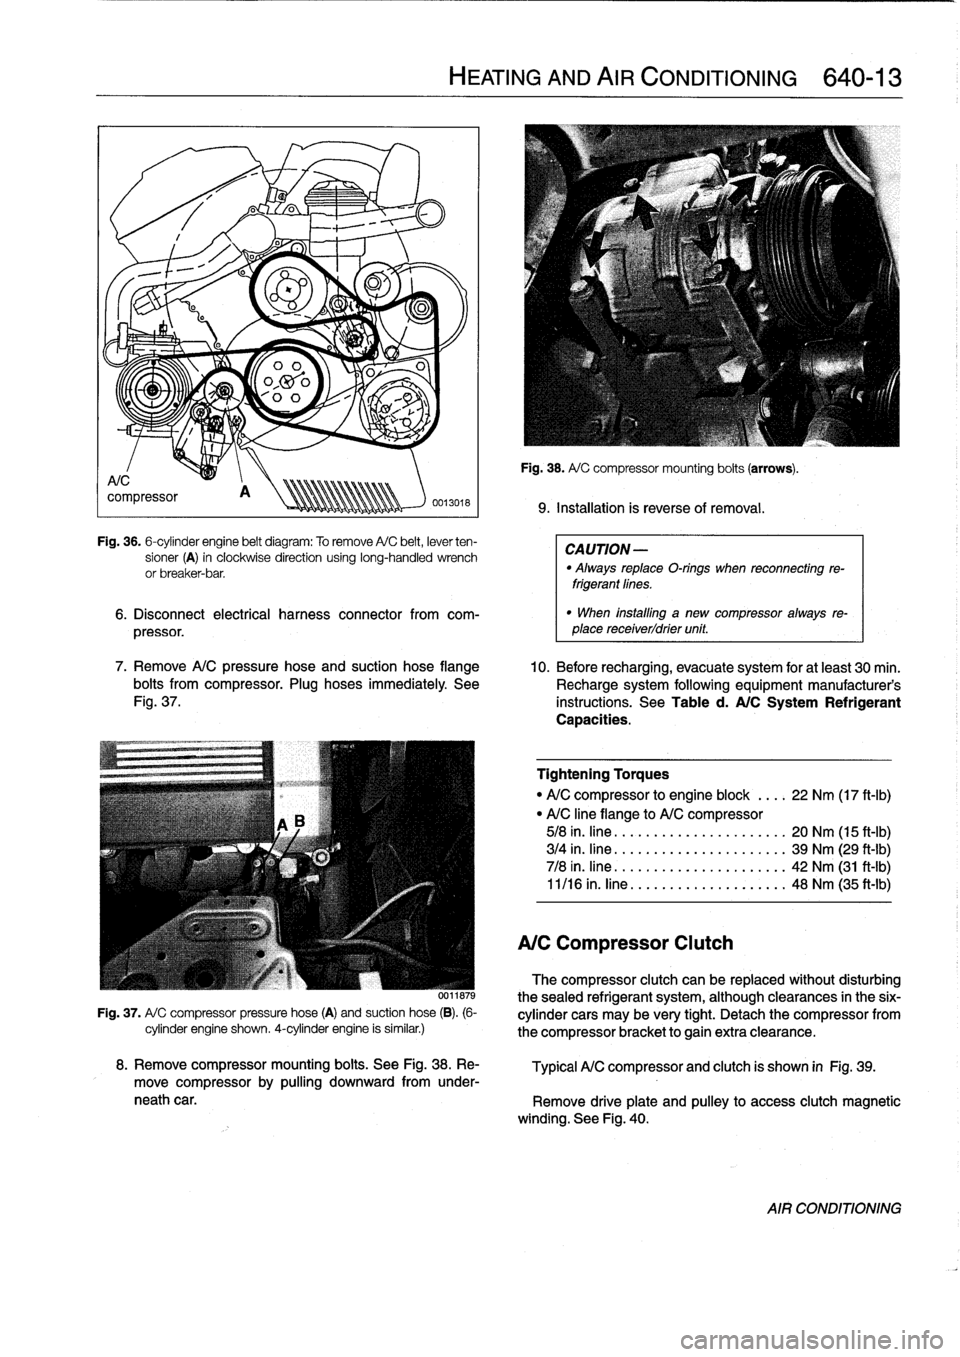 BMW M3 1994 E36 Owners Manual 
Fig
.
36
.
6-cylinder
engine
belt
diagram
:
To
remove
A/C
belt,
lever
ten-
sioner
(A)
in
clockwise
direction
using
long-handled
wrench
or
breaker-bar
.

6
.
Disconnect
electrical
harness
connector
fr